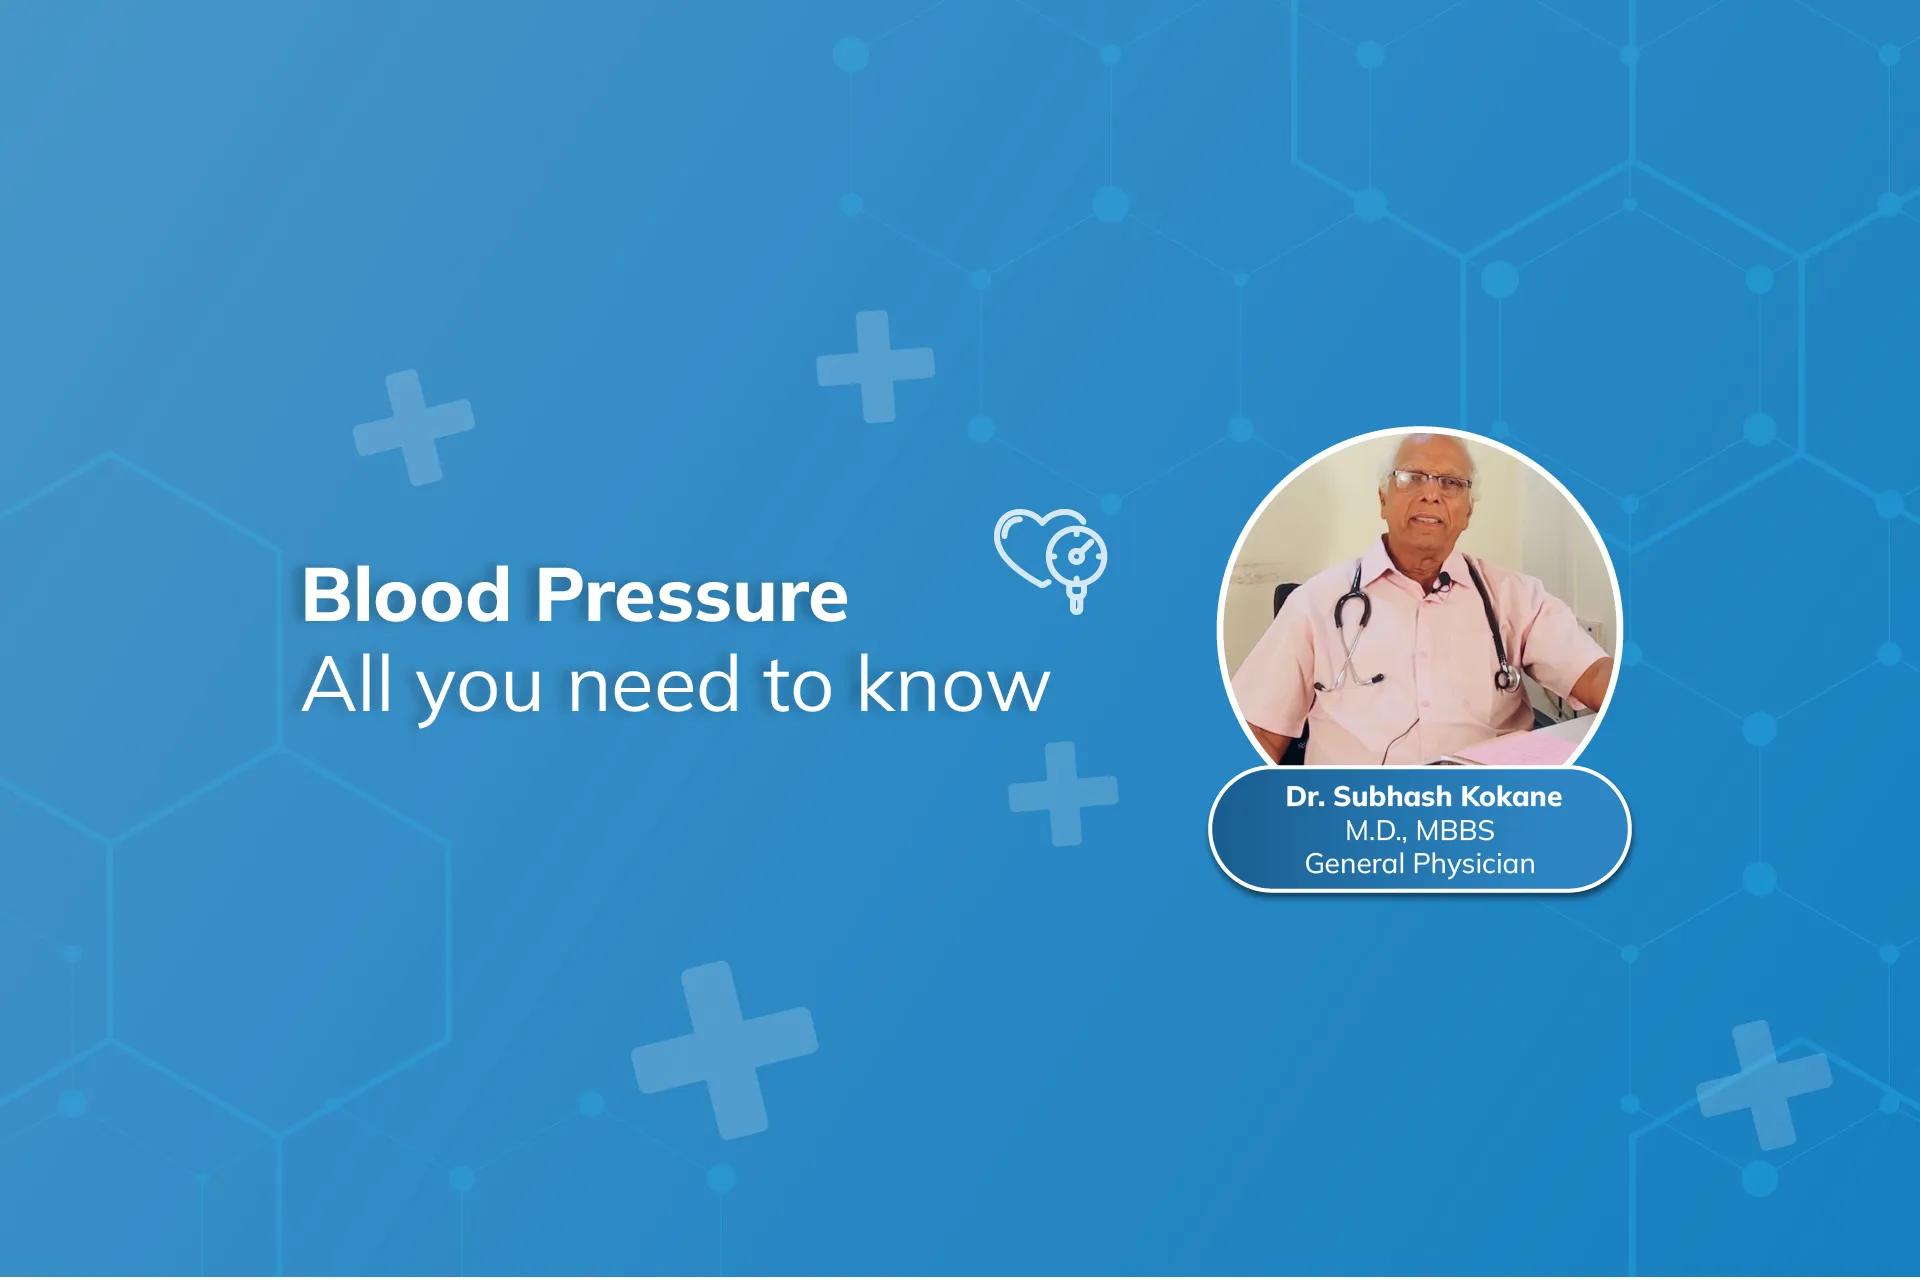 Blood Pressure: All you Need to Know by Dr. Subhash Kokane